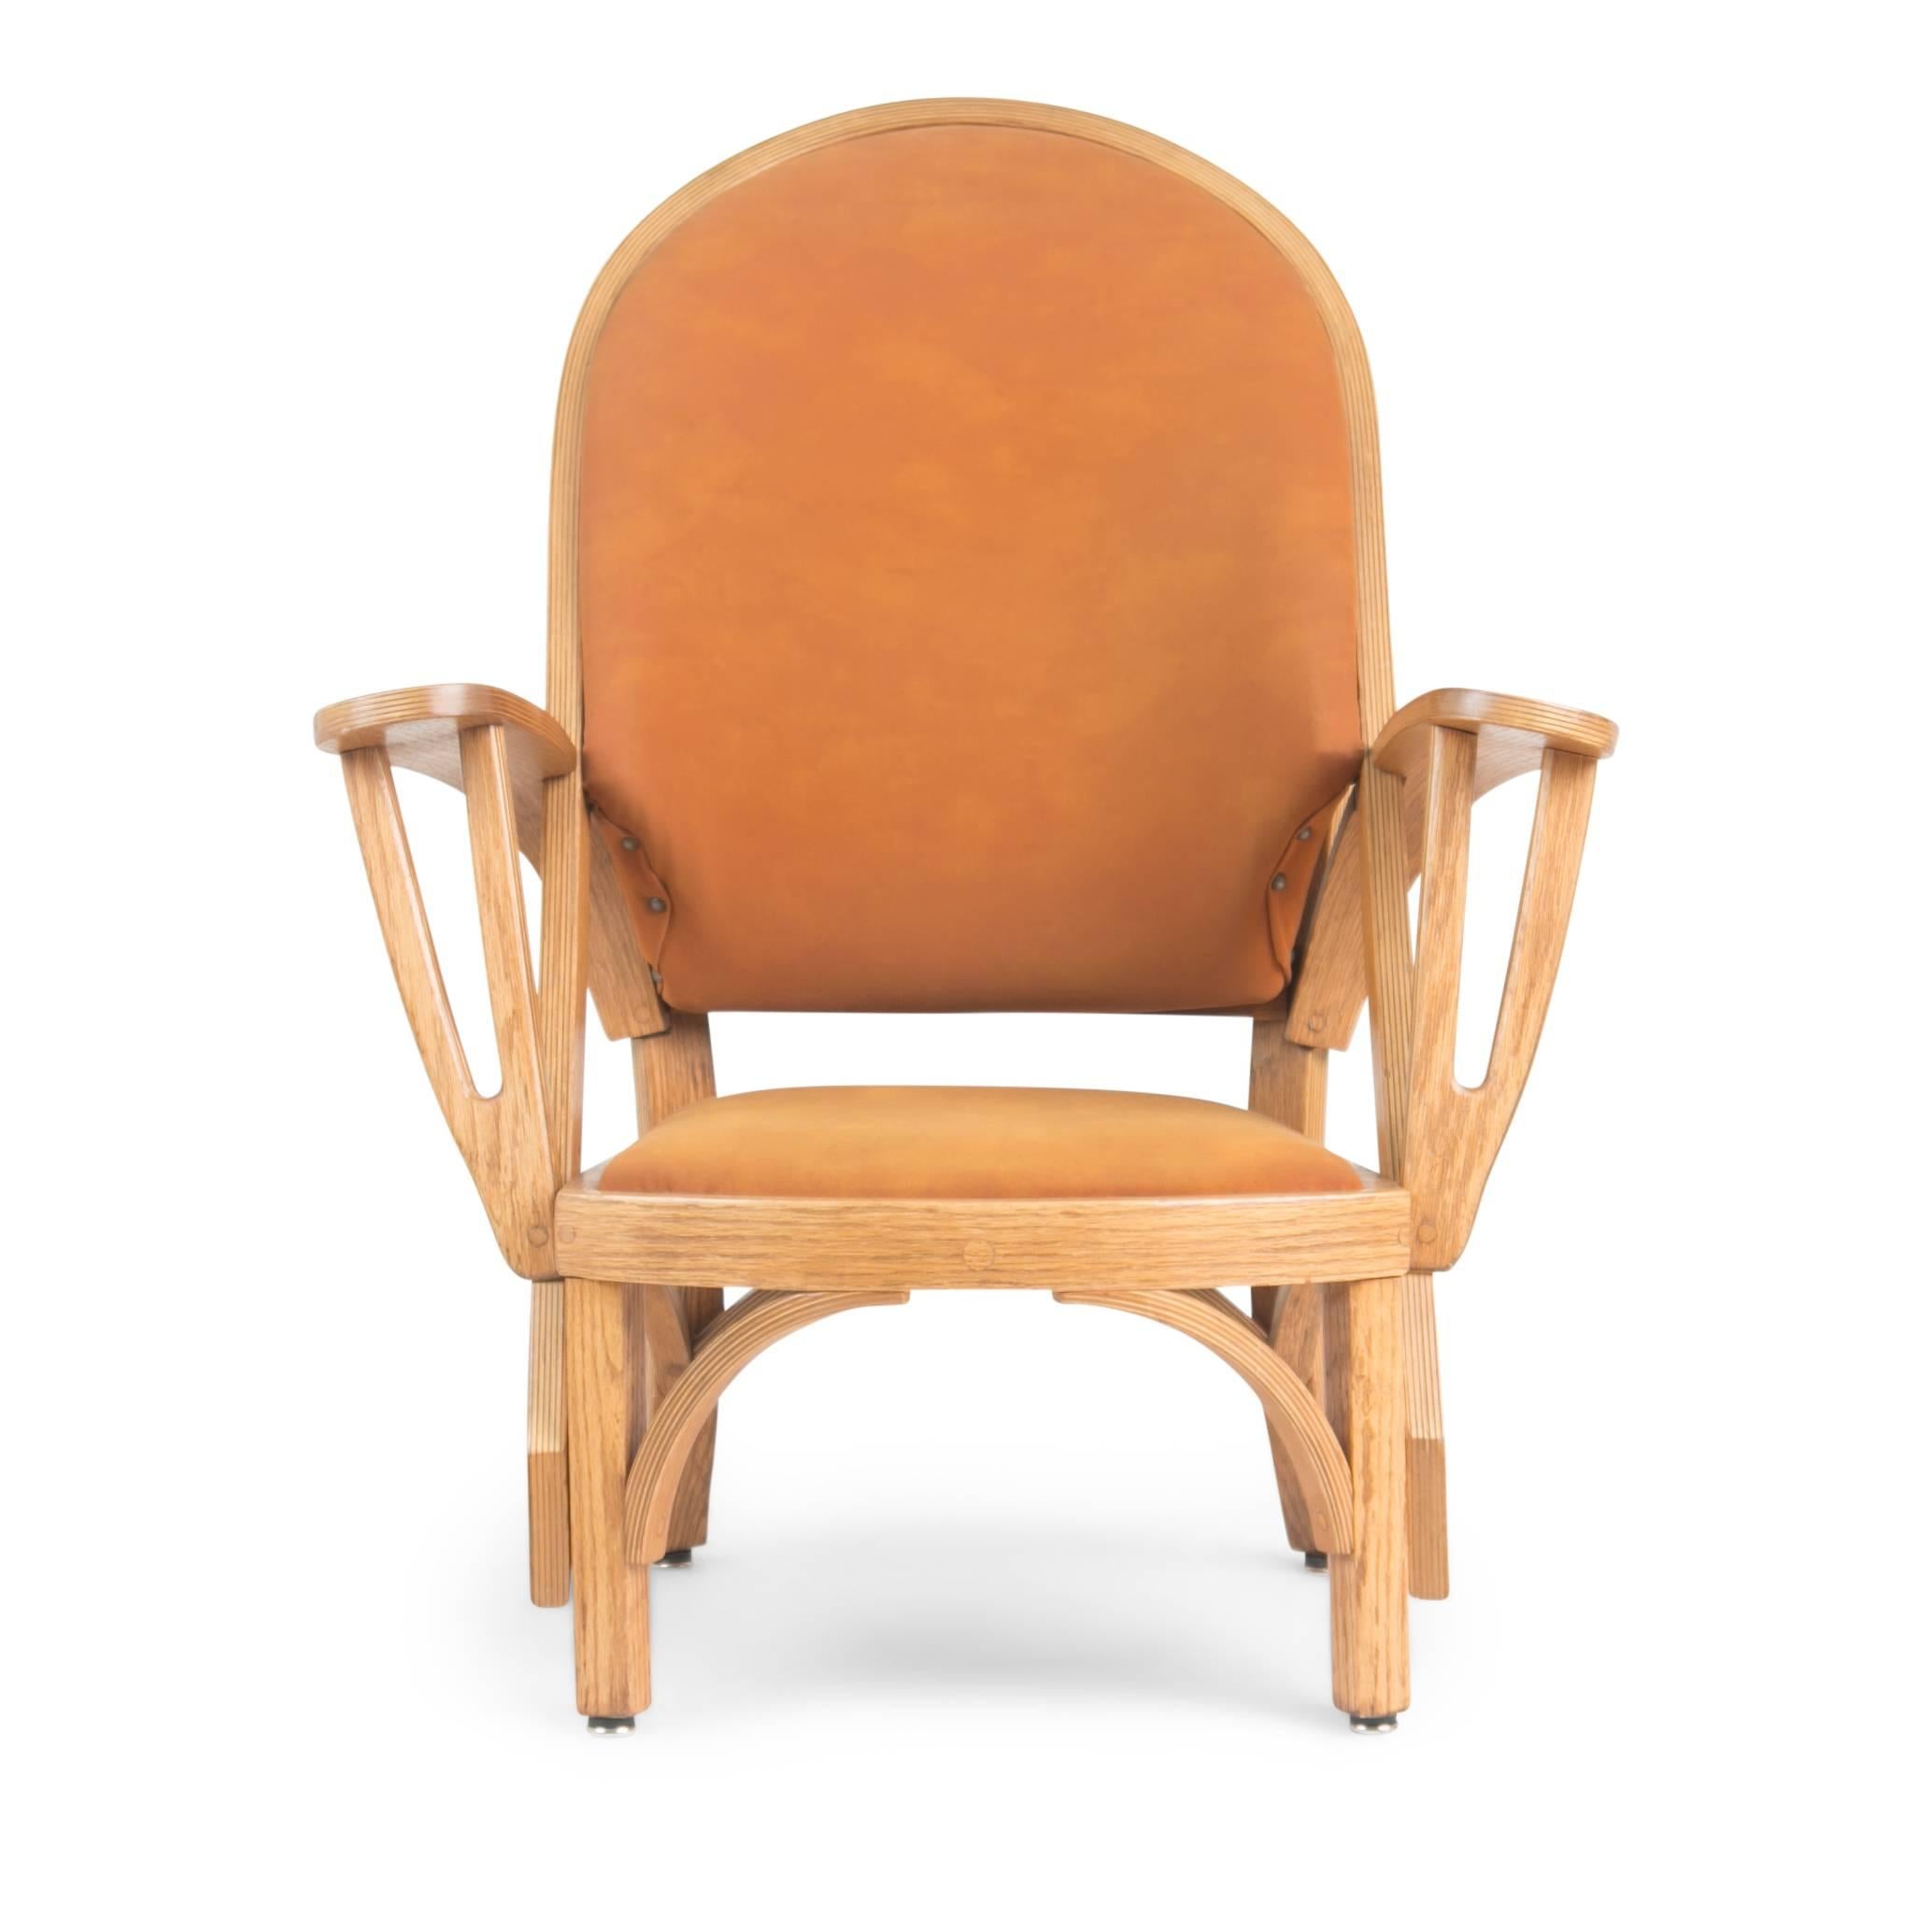 Pair of custom-made Norman Ridenour bentwood armchairs. This set of low lounge chairs feature sculptural bentwood frames fabricated from oak and are upholstered in an orange tone suede leather punctuated by studs close to the arms. These have been